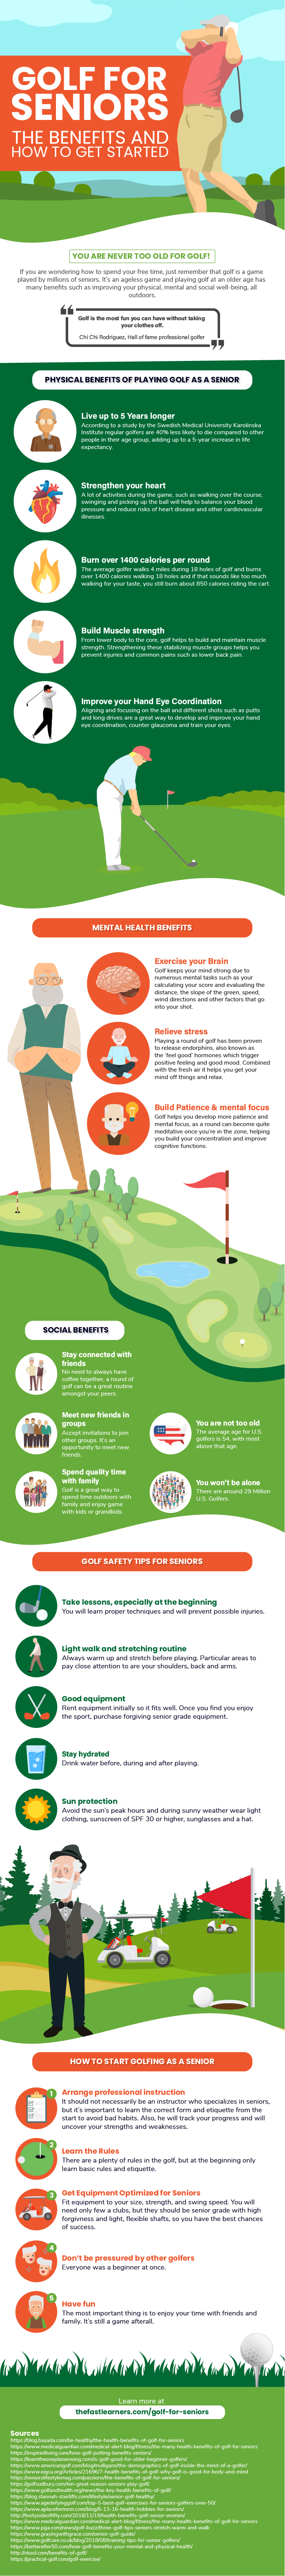 Golf for Seniors - Benefits and How to get started